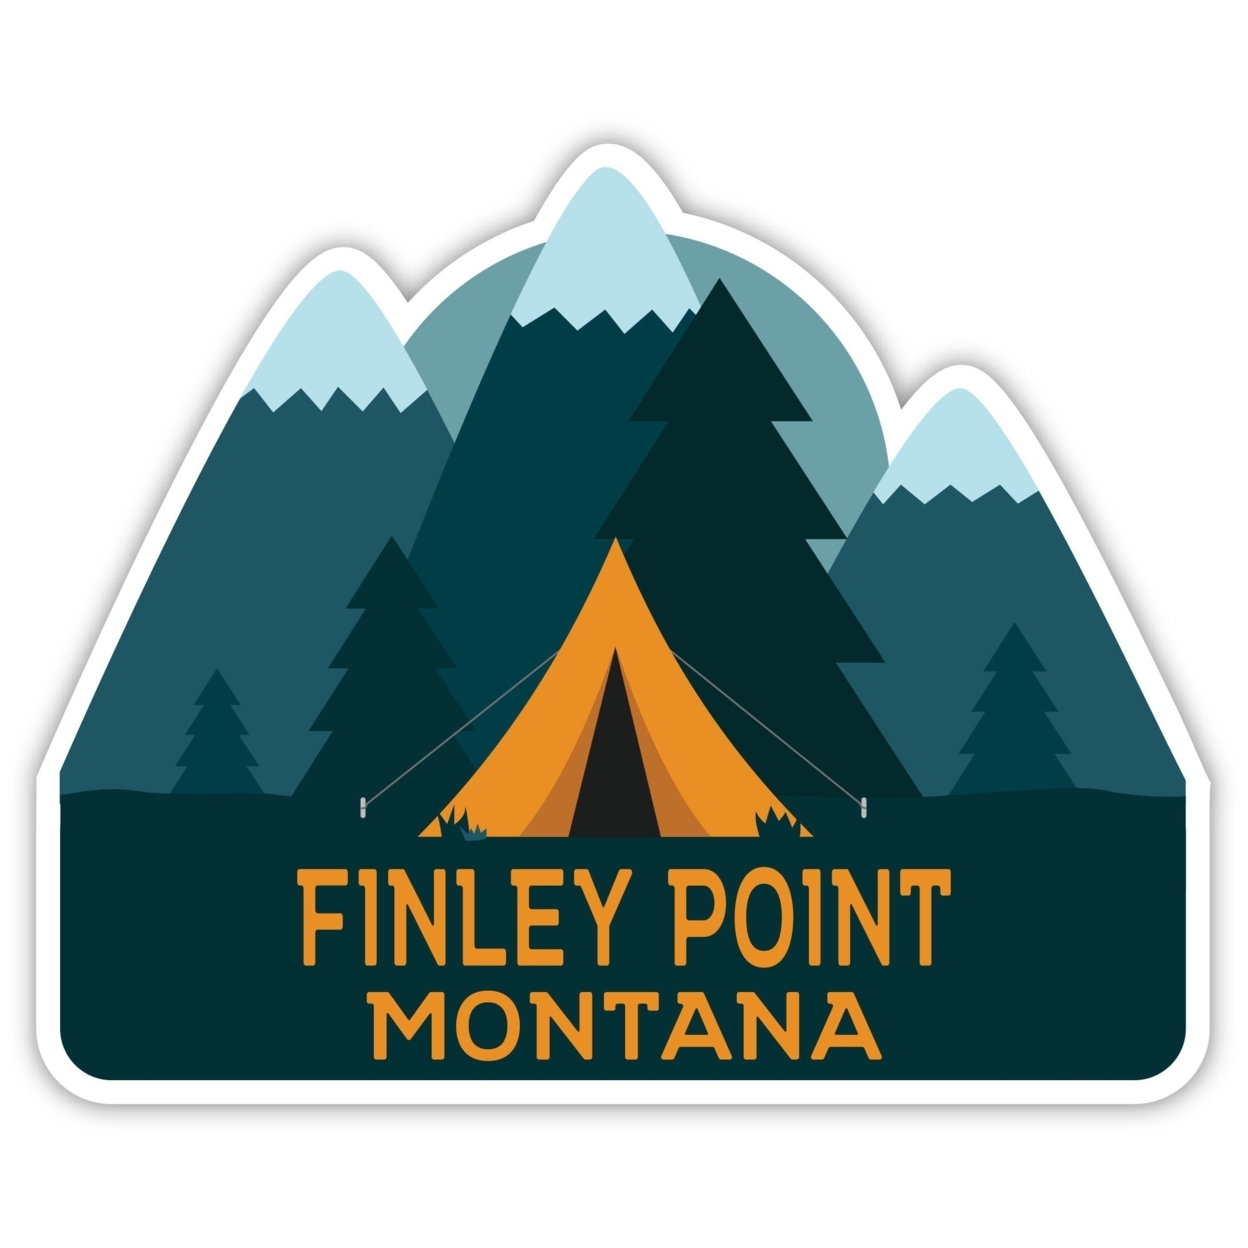 Finley Point Montana Souvenir Decorative Stickers (Choose Theme And Size) - 4-Pack, 4-Inch, Tent